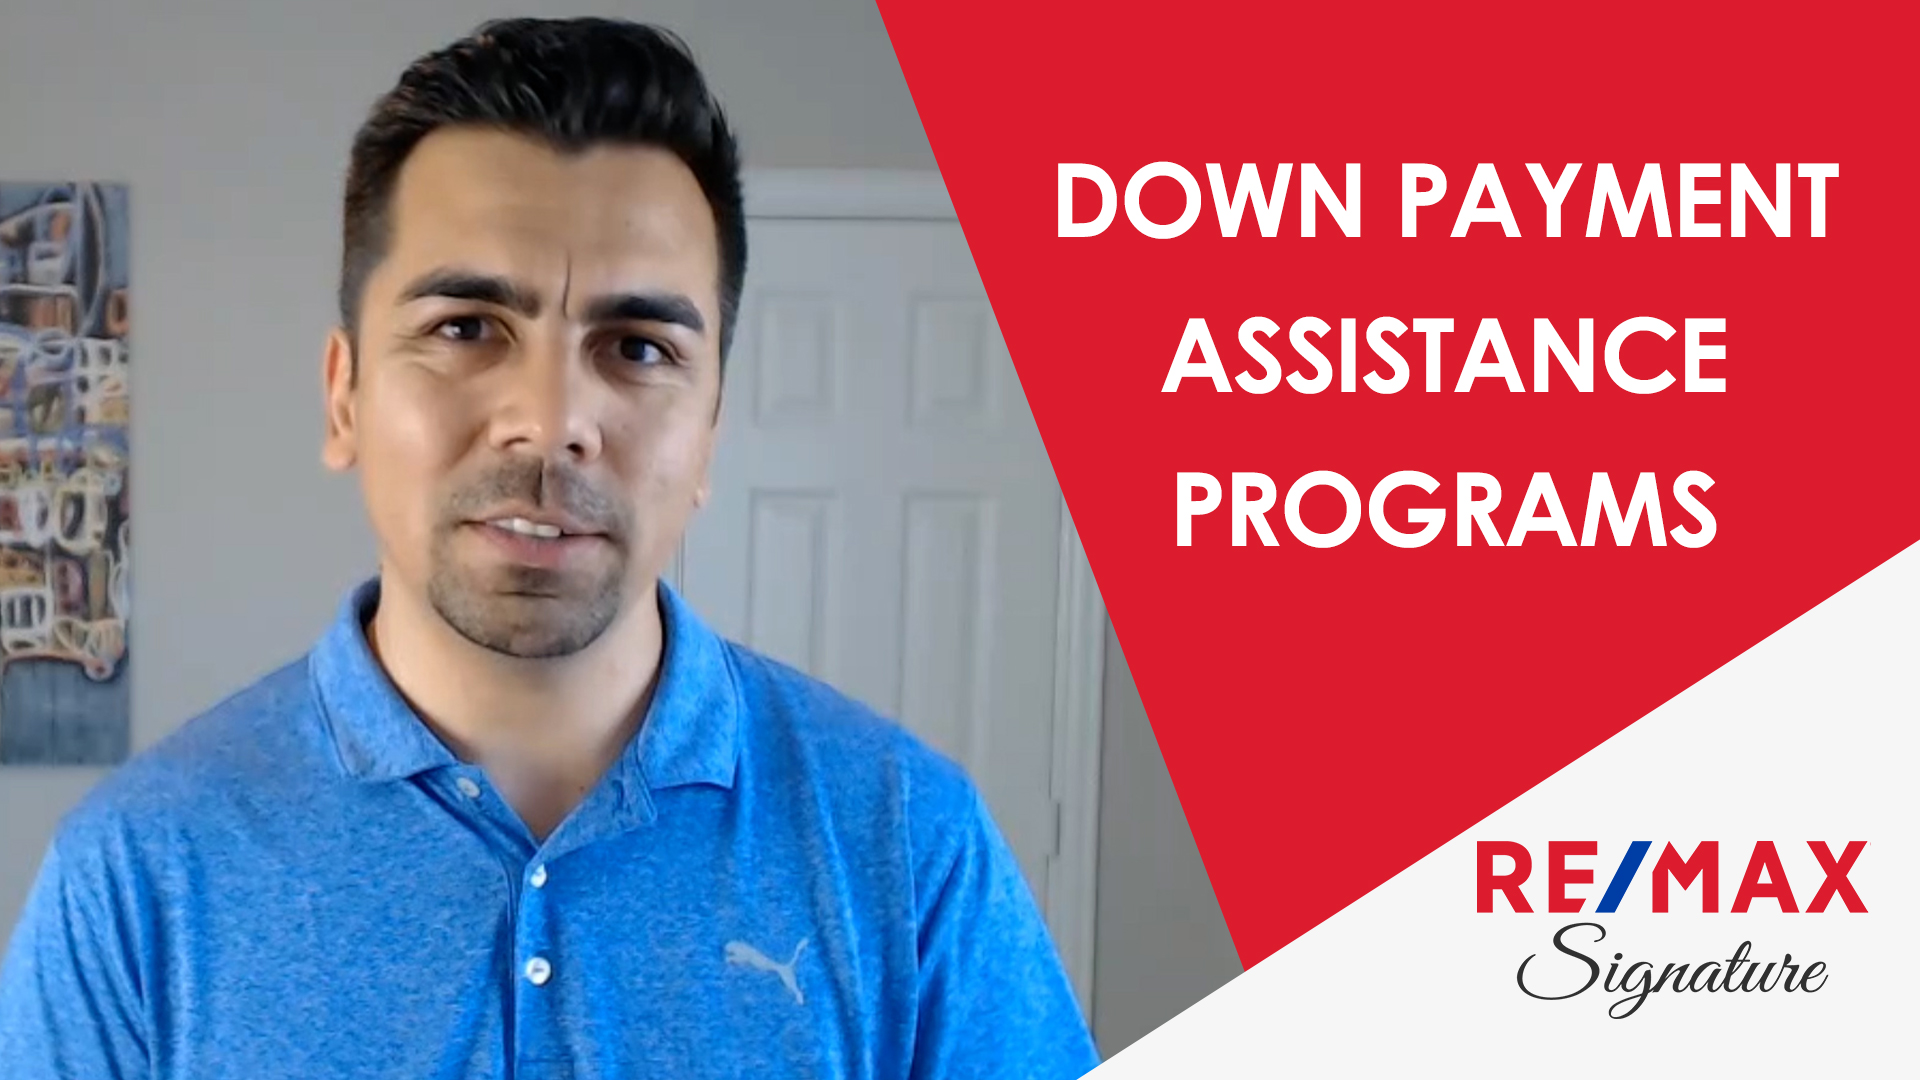 Q: Which Down Payment Assistance Programs Can Help You?